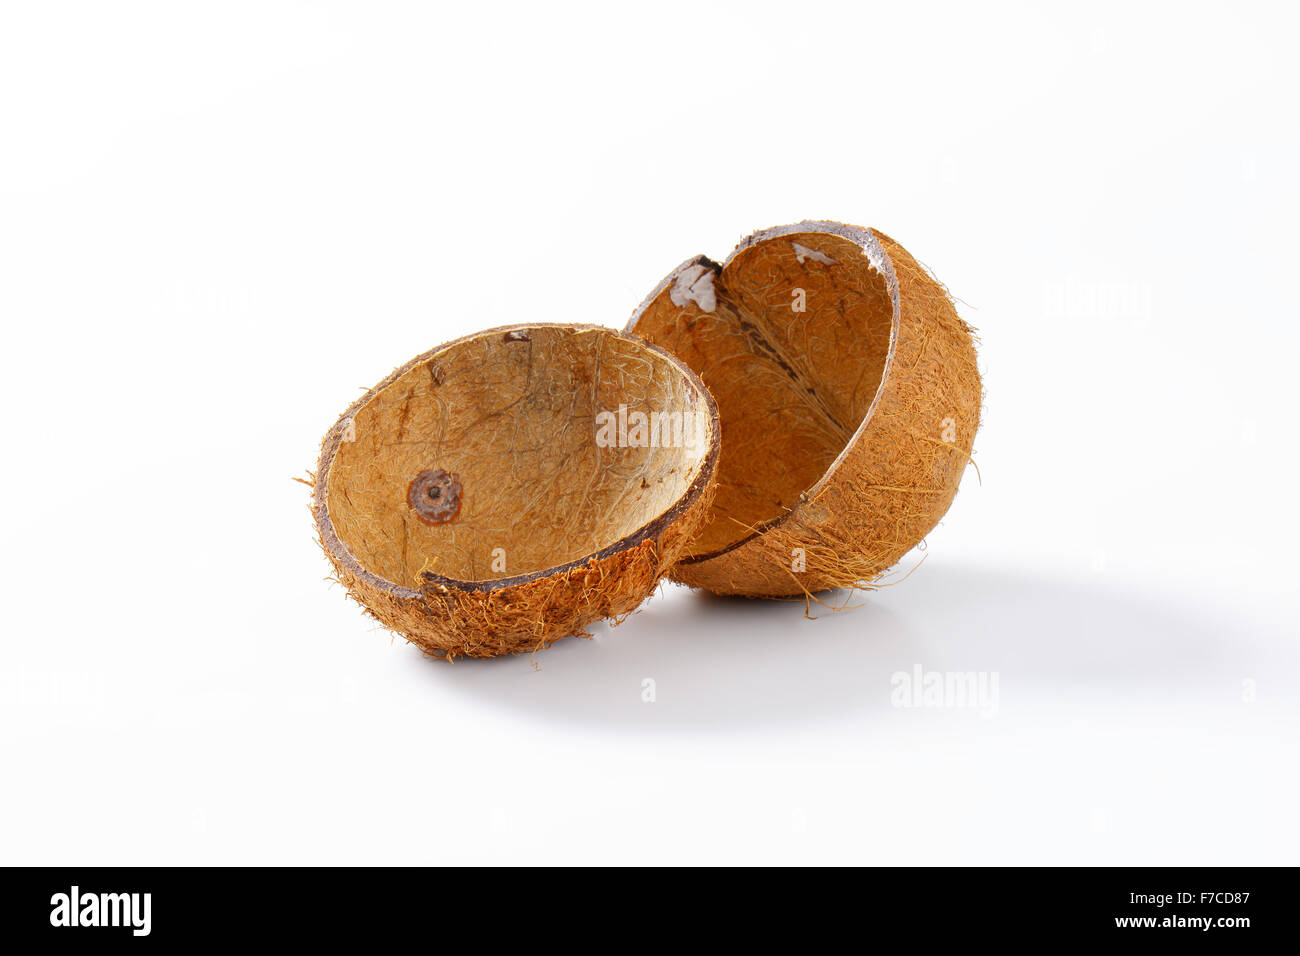 Two halves of a coconut shell Stock Photo